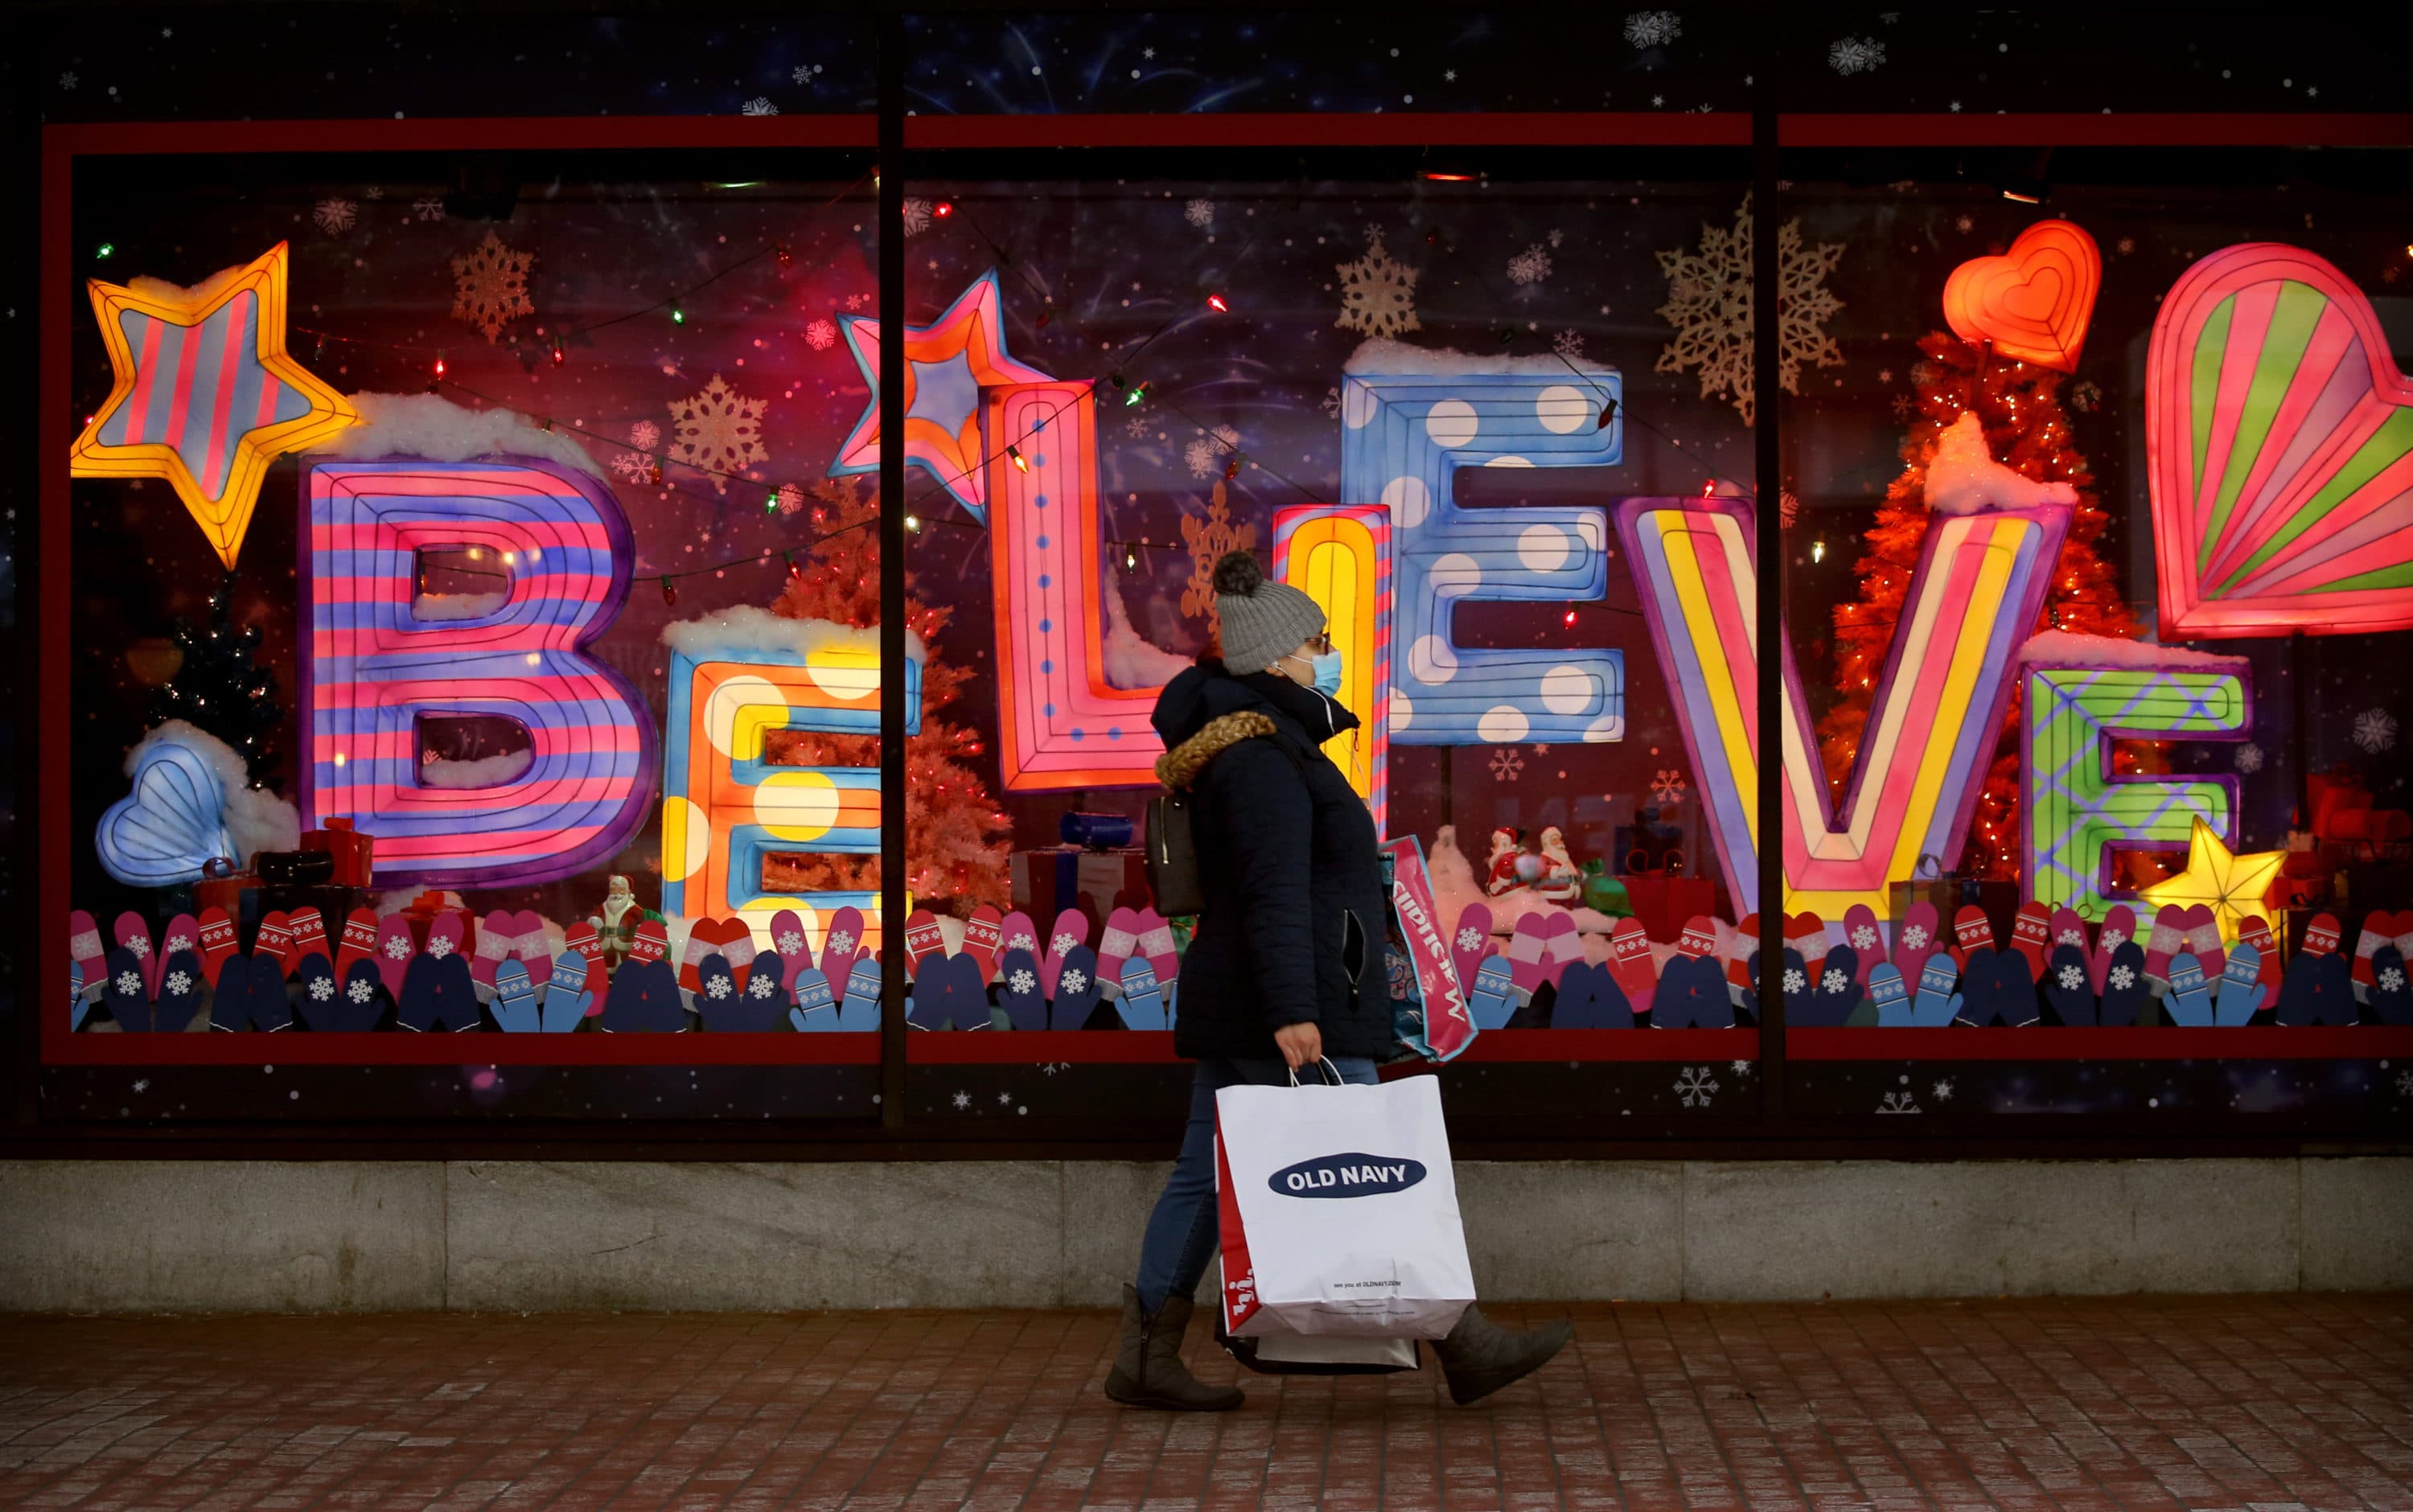 A shopper passes a Macy's store holiday window in Downtown Crossing in Boston in December 2020. (Craig F. Walker/The Boston Globe via Getty Images)